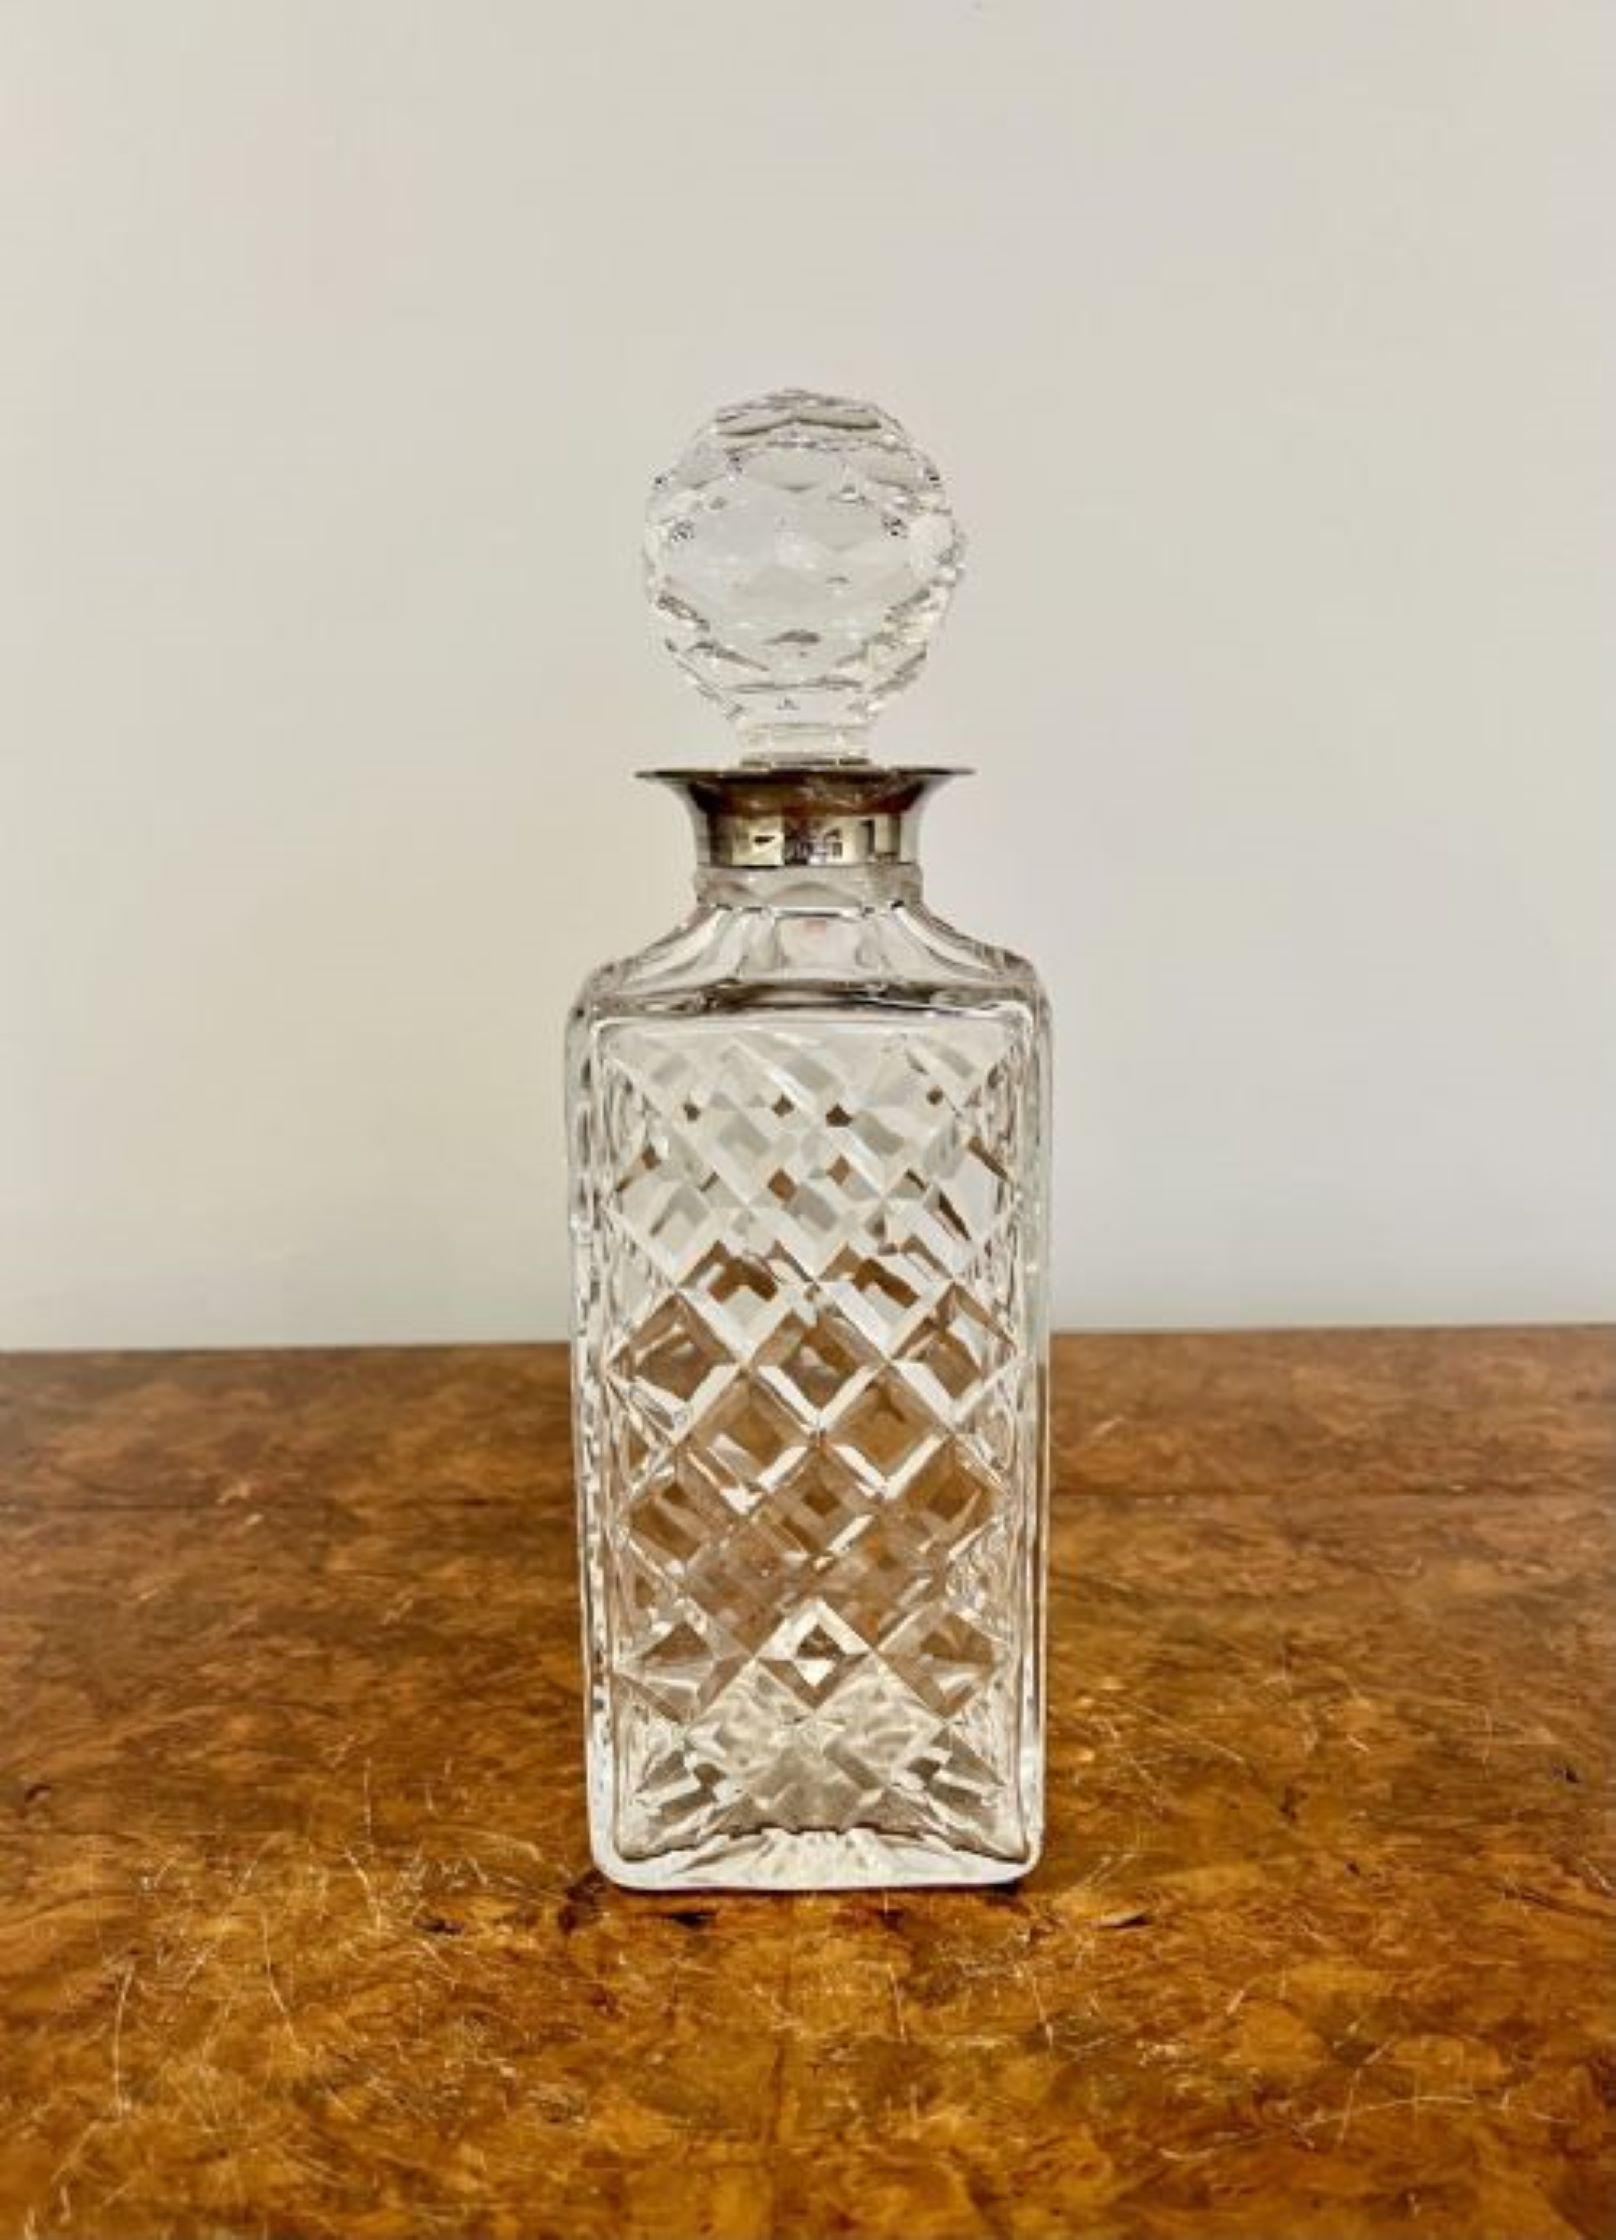 Antique Edwardian quality cut glass hallmarked silver collar decanter Quality antique cut glass decanter with the original stopper and a solid silver collar 